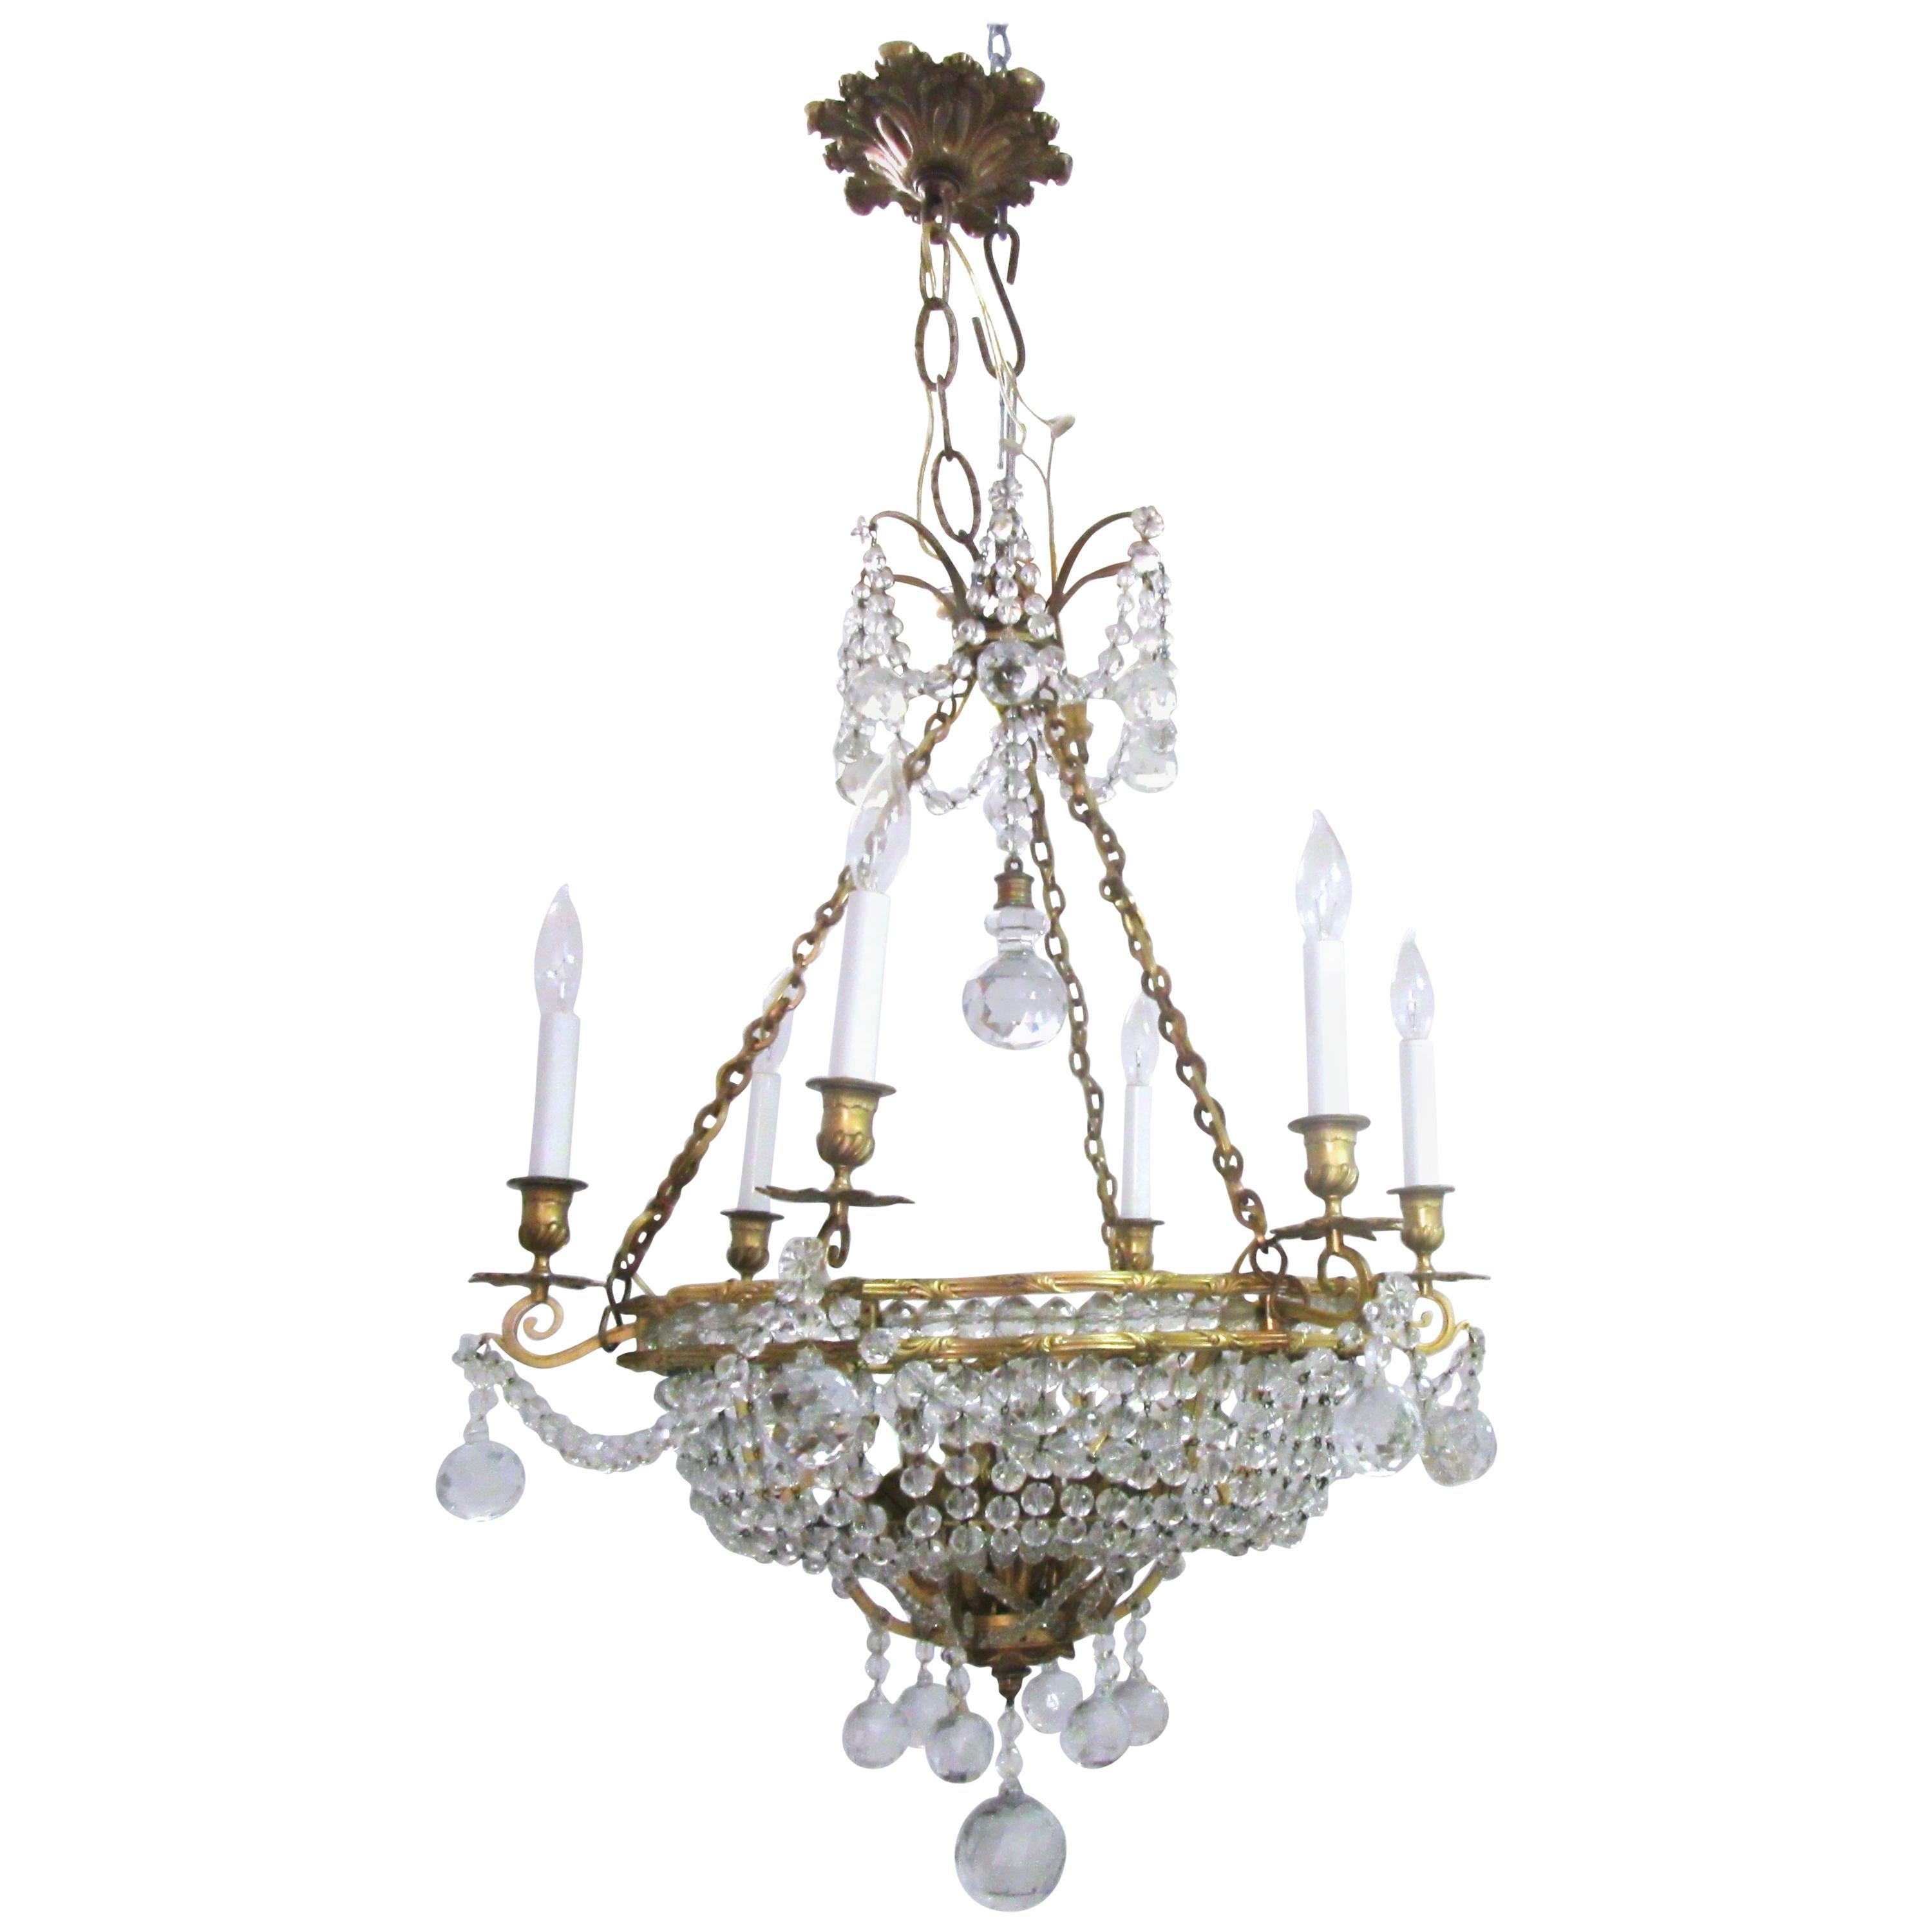 French Belle Époque Gilt Bronze Chandelier with Cut Crystal Elements